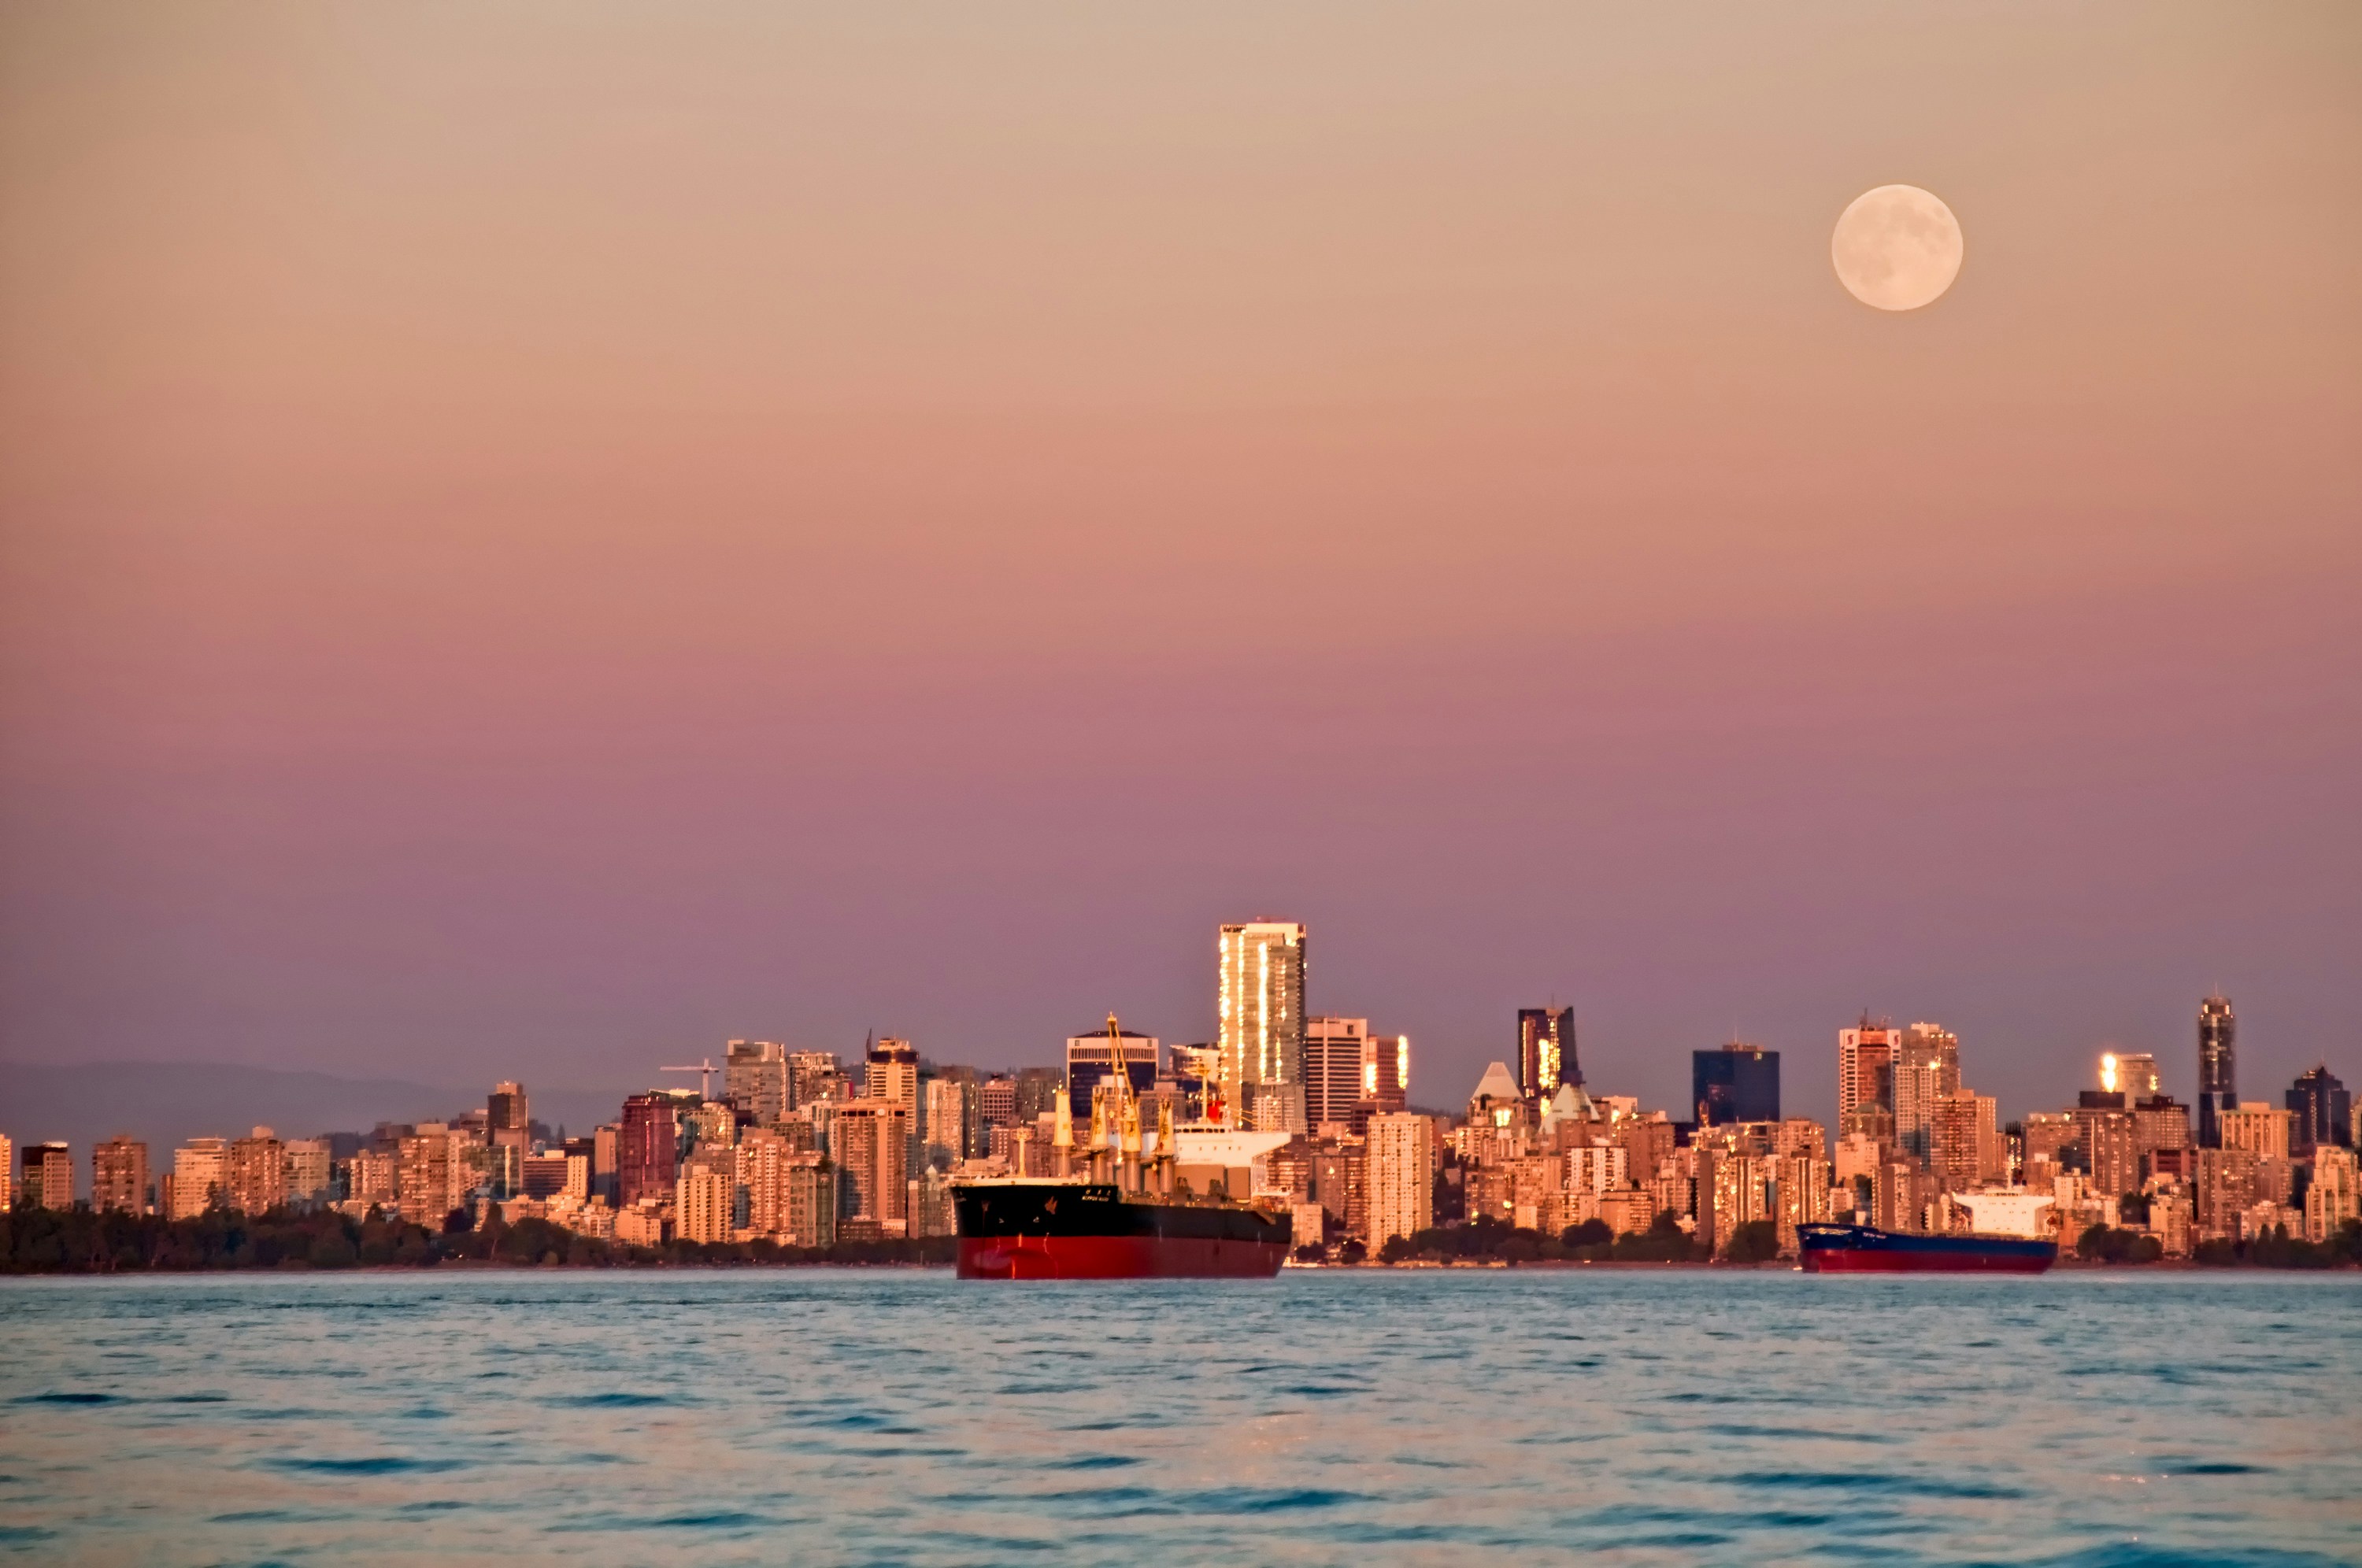 Coming back from salmon fishing at sunset the sunset lit Vancouver as the moon rose above the city, this was one of the last nice days before the clouds of winter came into the city.